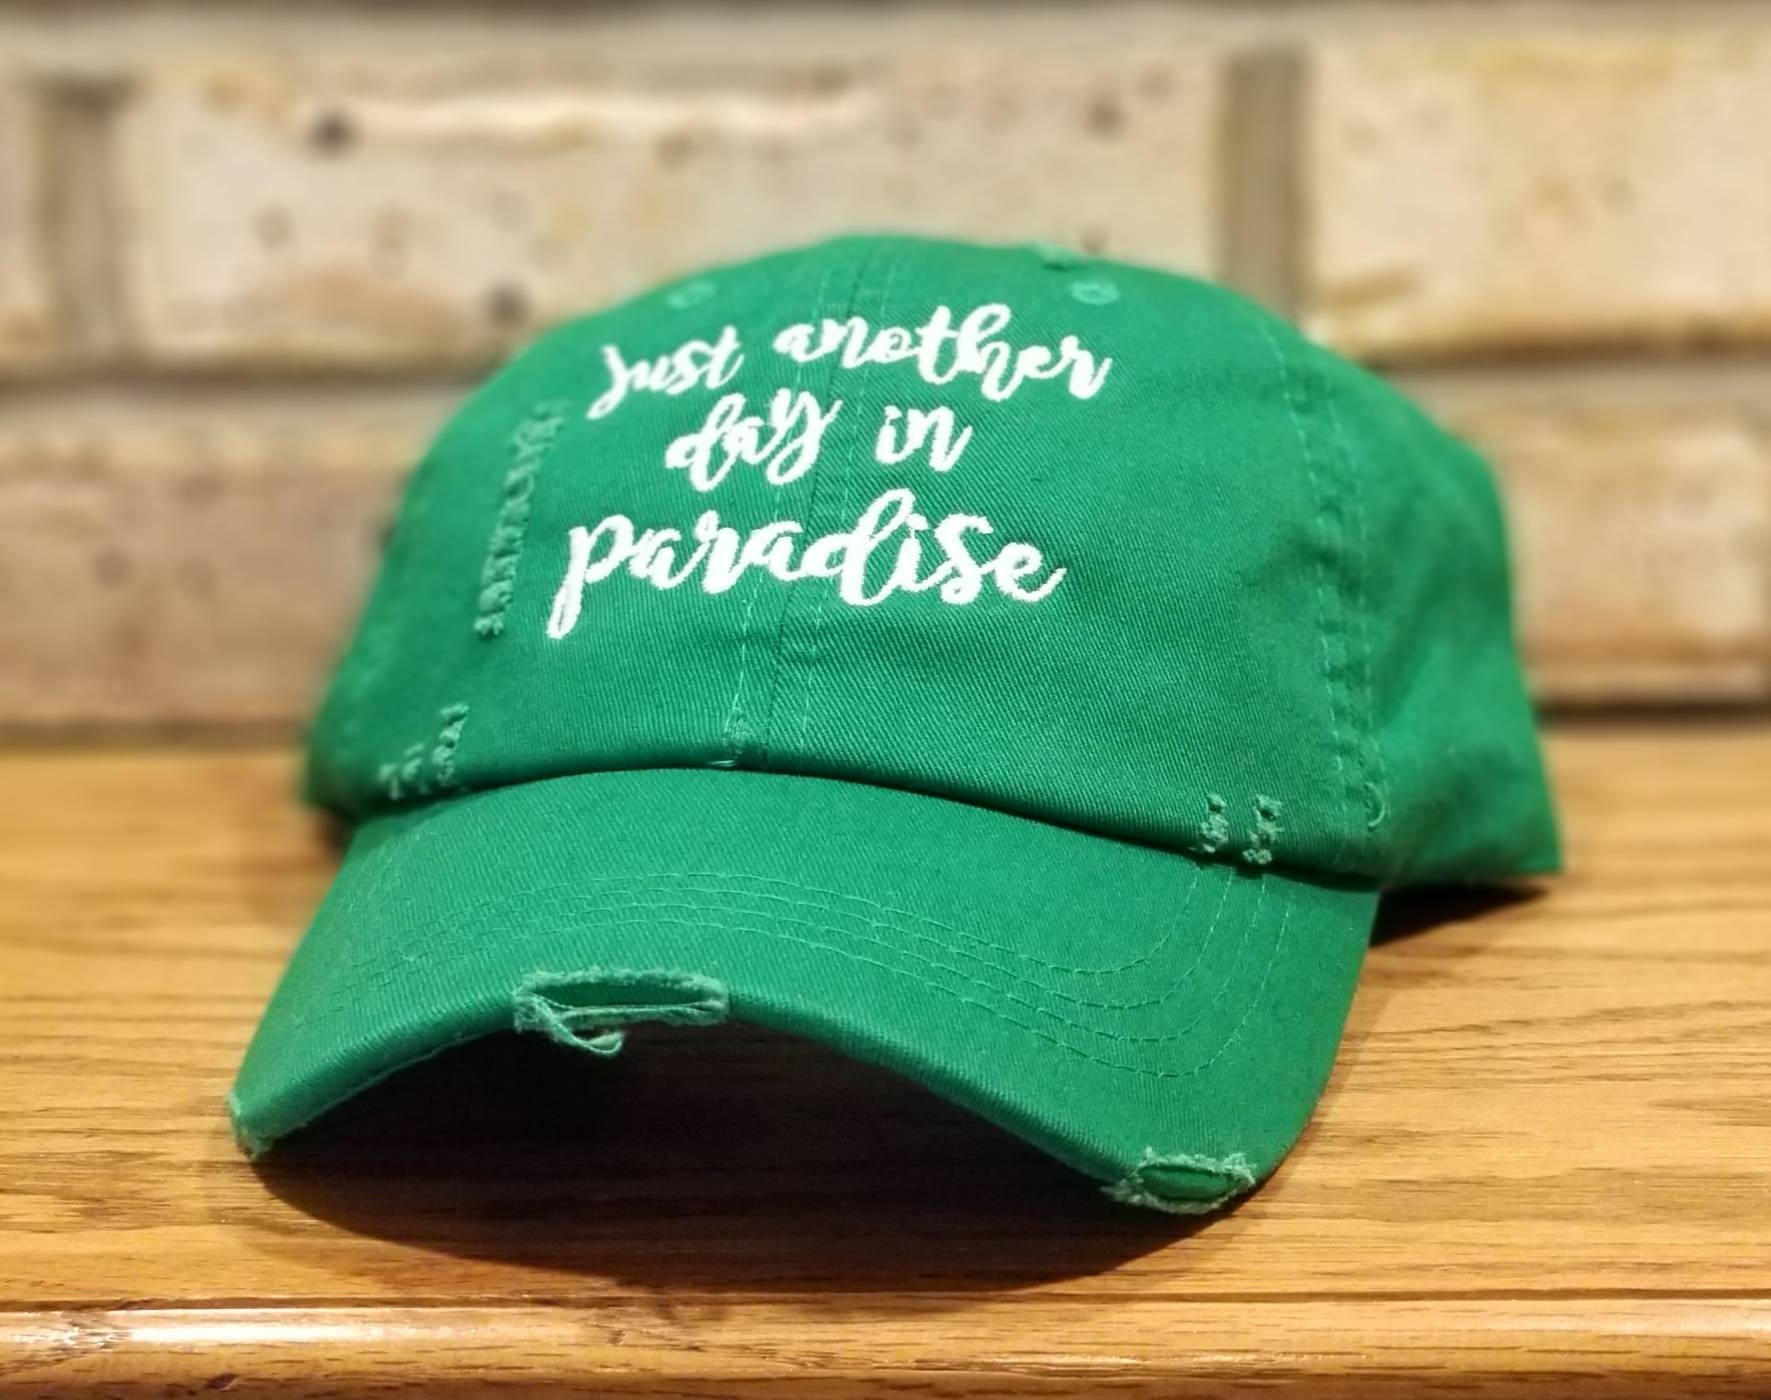 Just Another Day In Paradise Hat - Distressed Baseball Hat, Trucker Hat, Another Day In Paradise Cap, Can be Personalized or Monogrammed